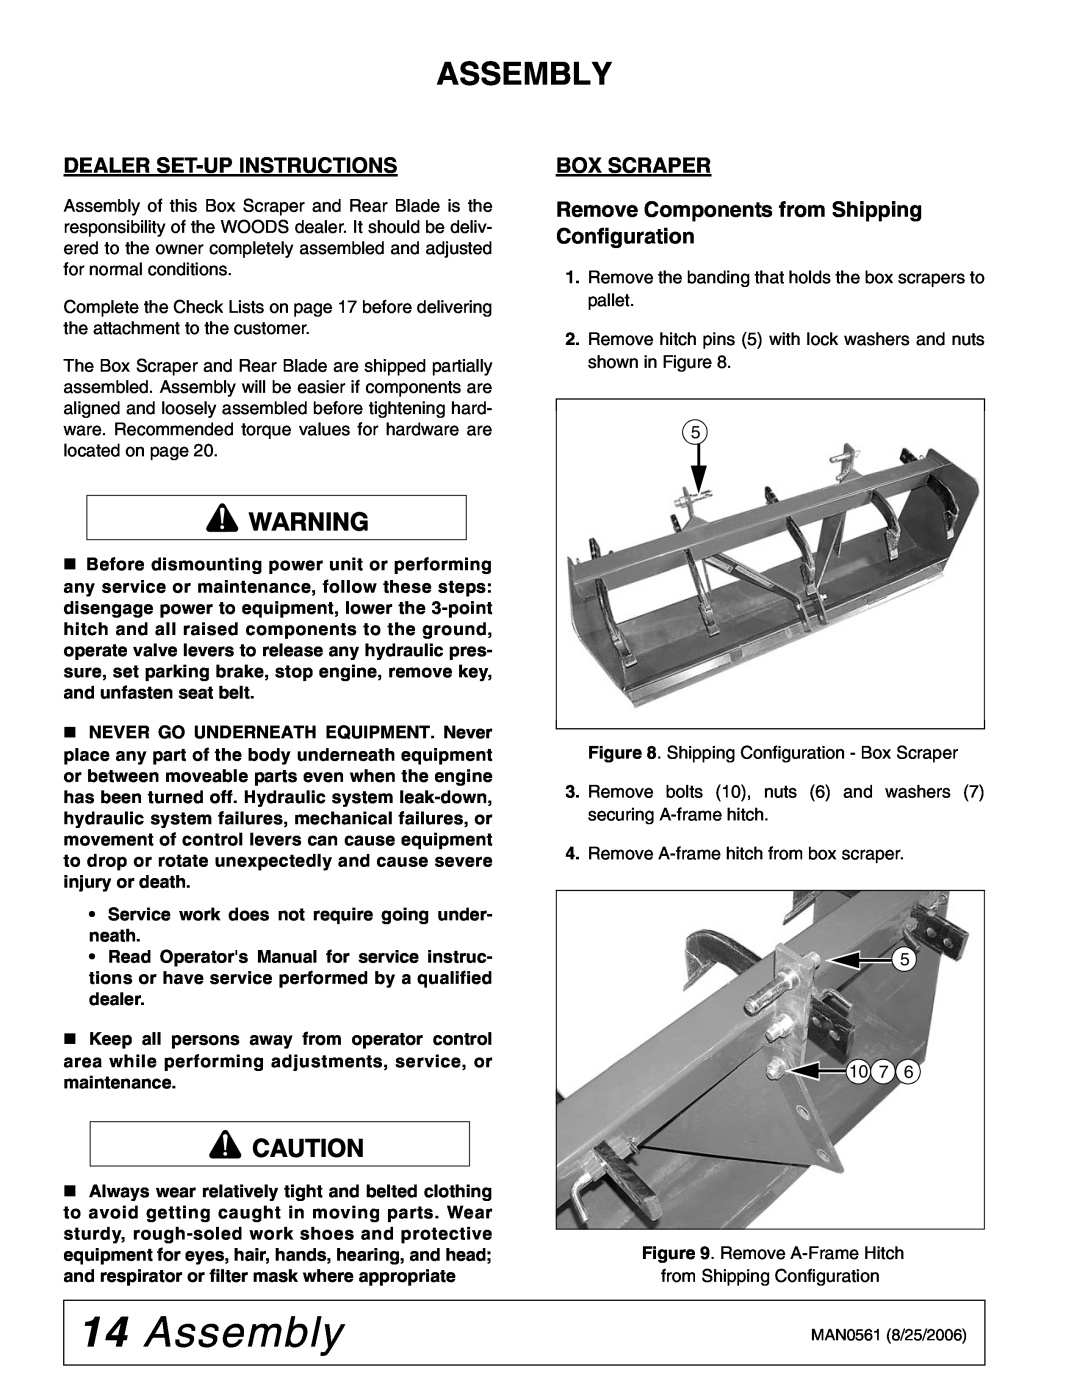 Woods Equipment BSE5, RBE5 Assembly, Dealer Set-Upinstructions, Box Scraper, Remove Components from Shipping Configuration 